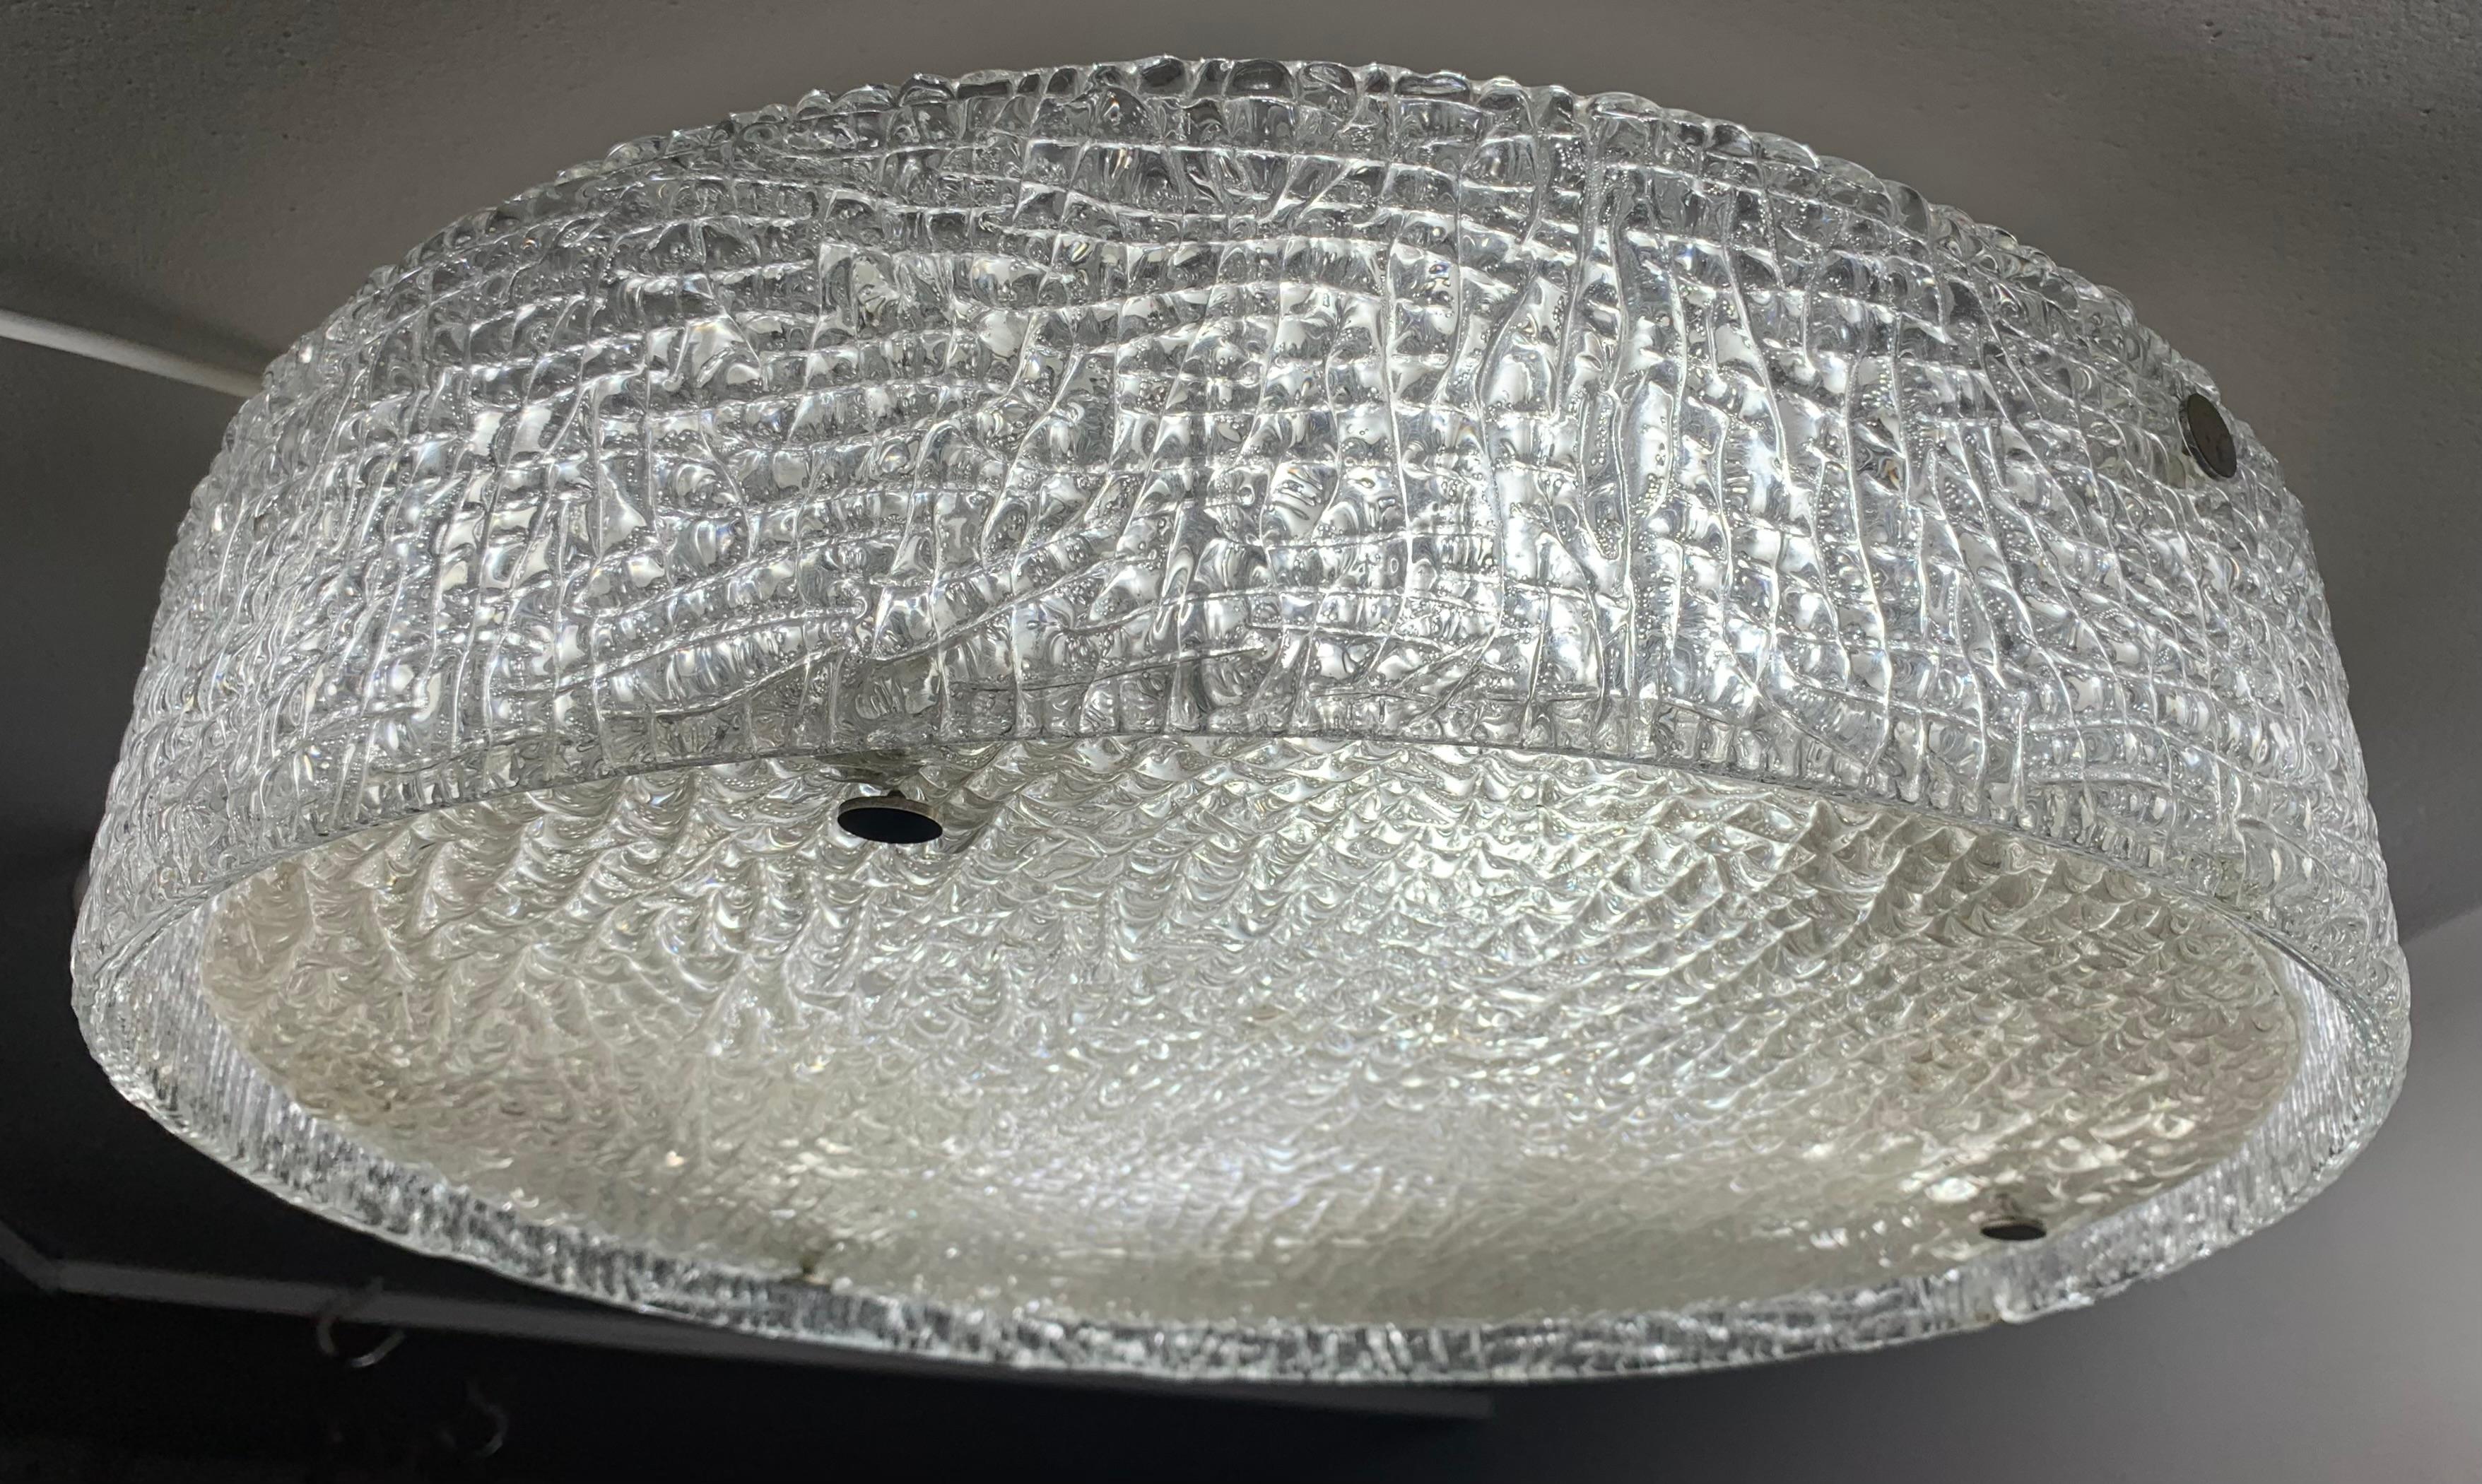 Large 1960s German Kaiser Leuchten textured, iced-glass, flush mount ceiling light. The thick textured glass circular base plate is mounted onto the white frame with three chrome screws which secure it in place. The light-bulbs can be accessed by